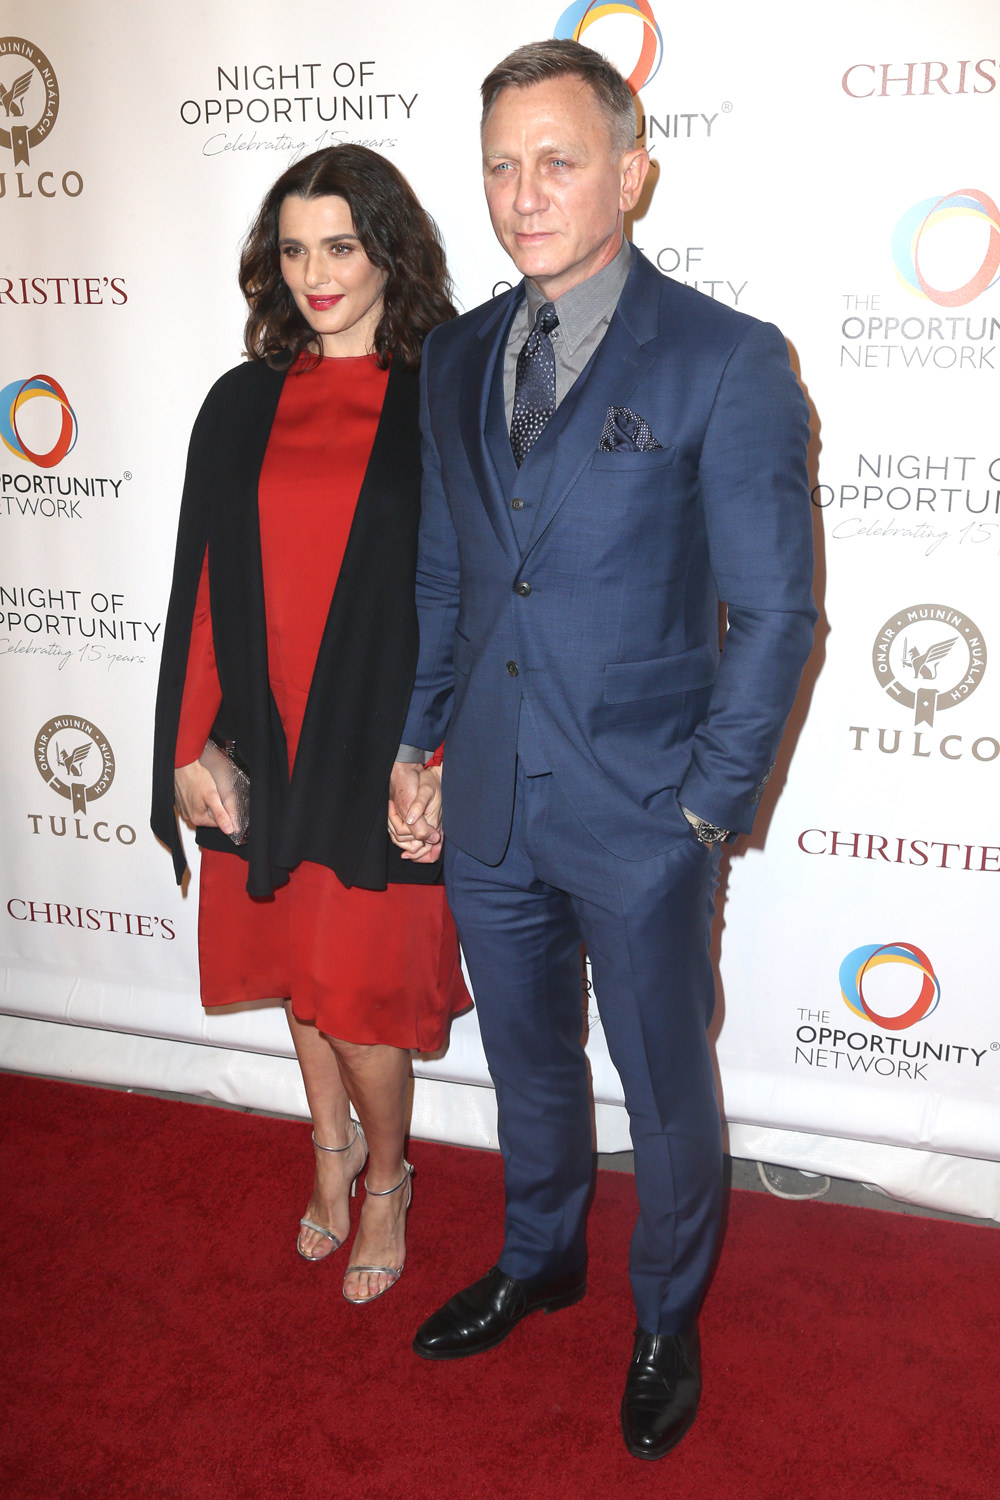 Rachel Weisz and Daniel Craig at the 2018 Night of Opportunity Gala...